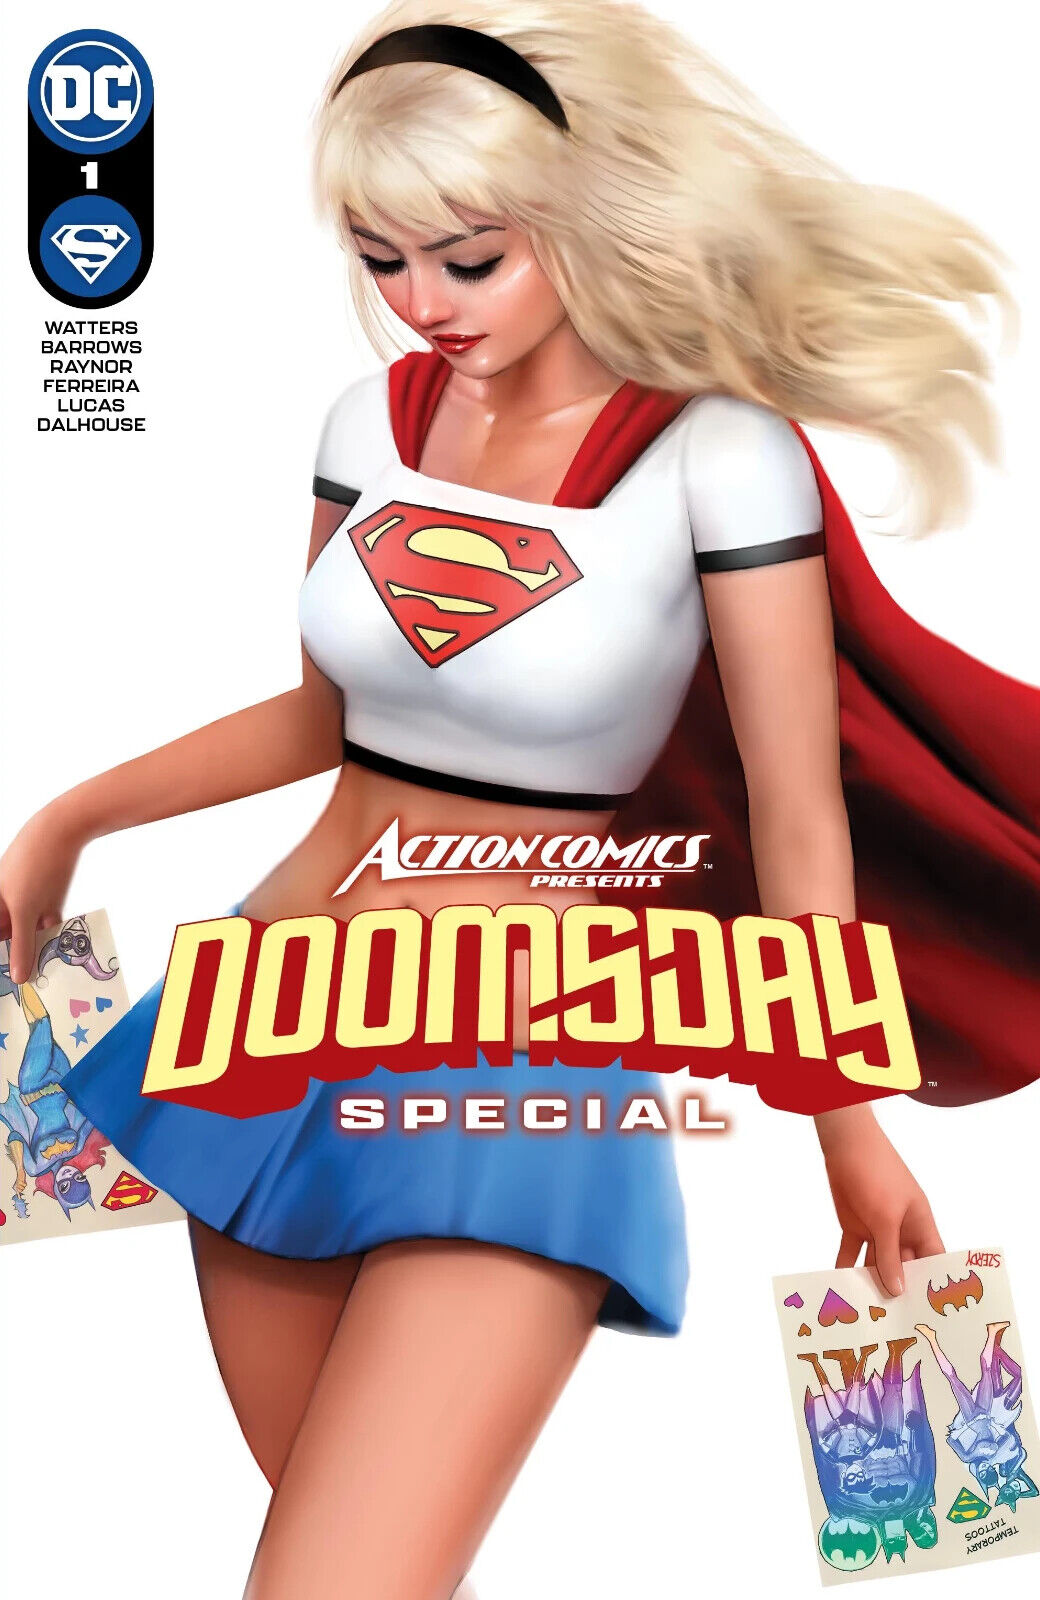 ACTION COMICS PRESENTS: DOOMSDAY SPECIAL #1 (NATHAN SZERDY SUPERGIRL EXCLUSIVE)